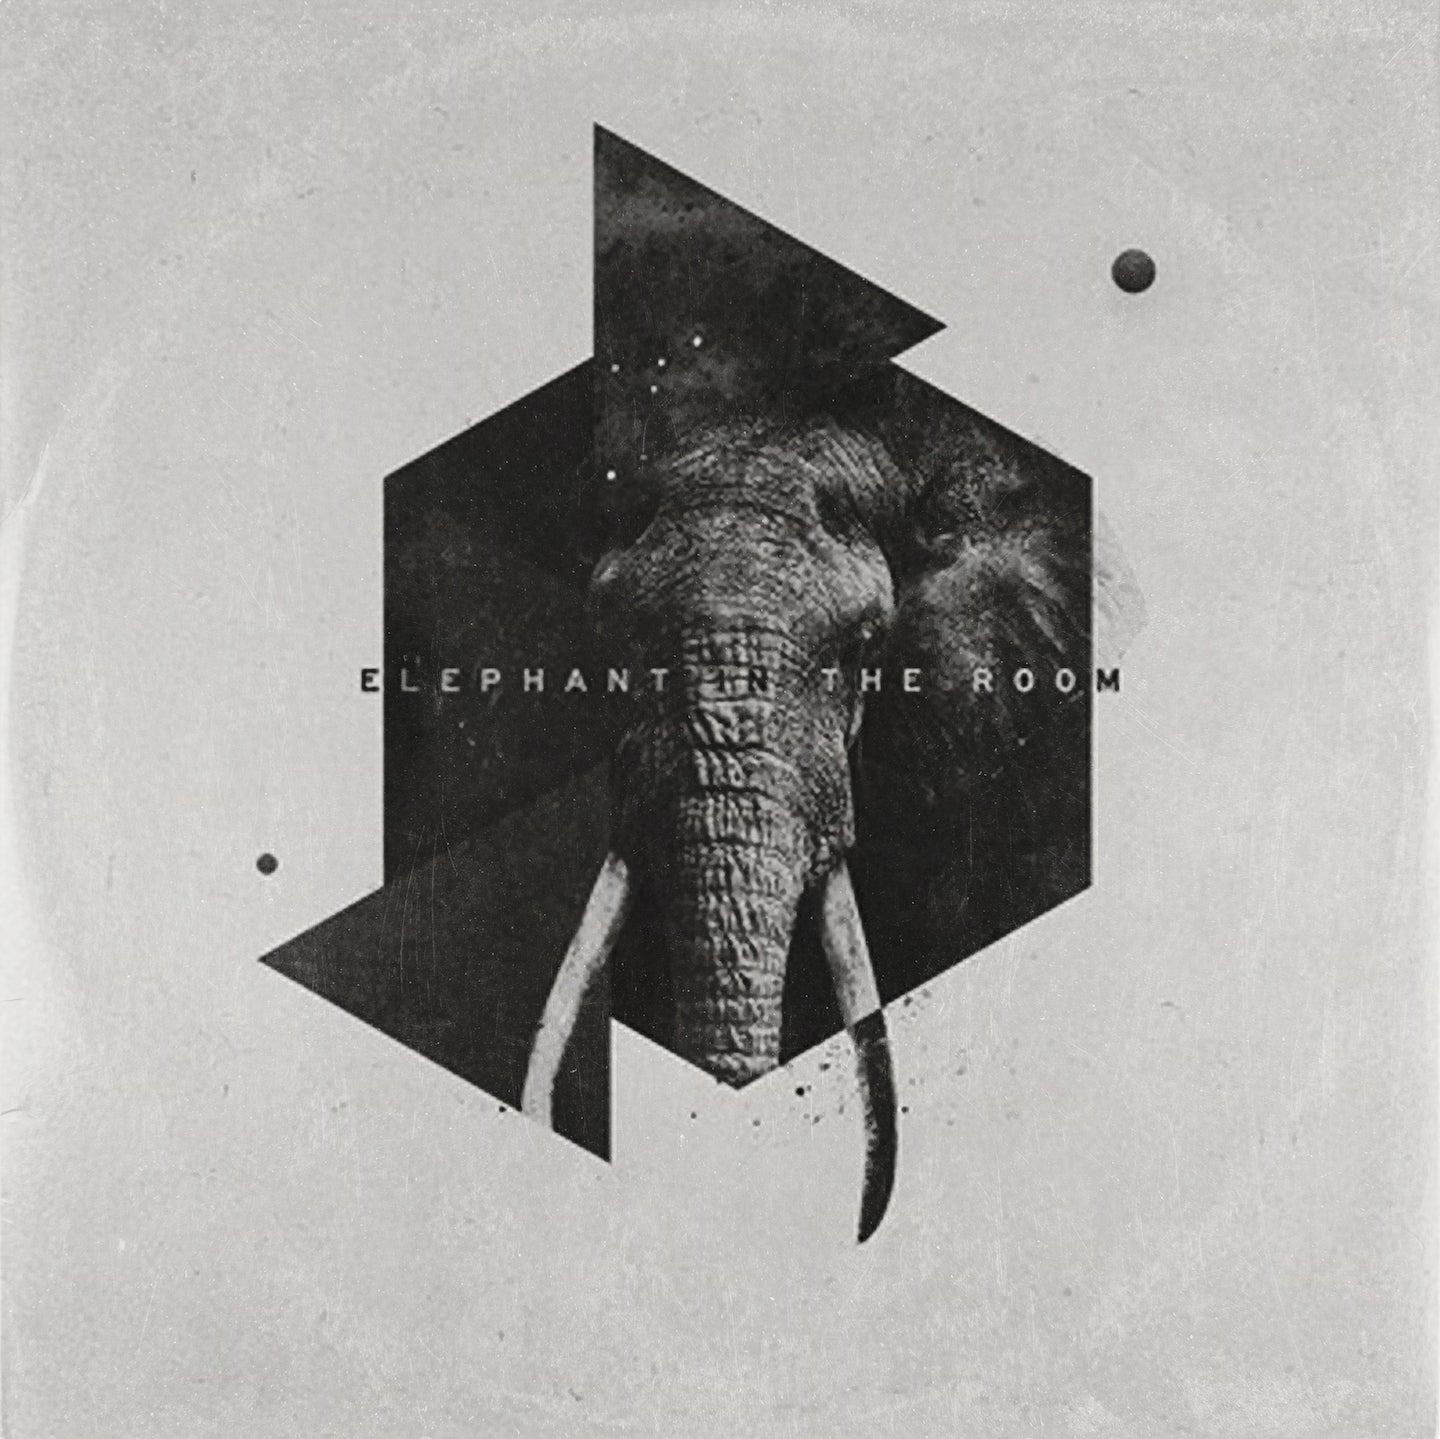 Eskimo Twins - The Elephant In The Room EP